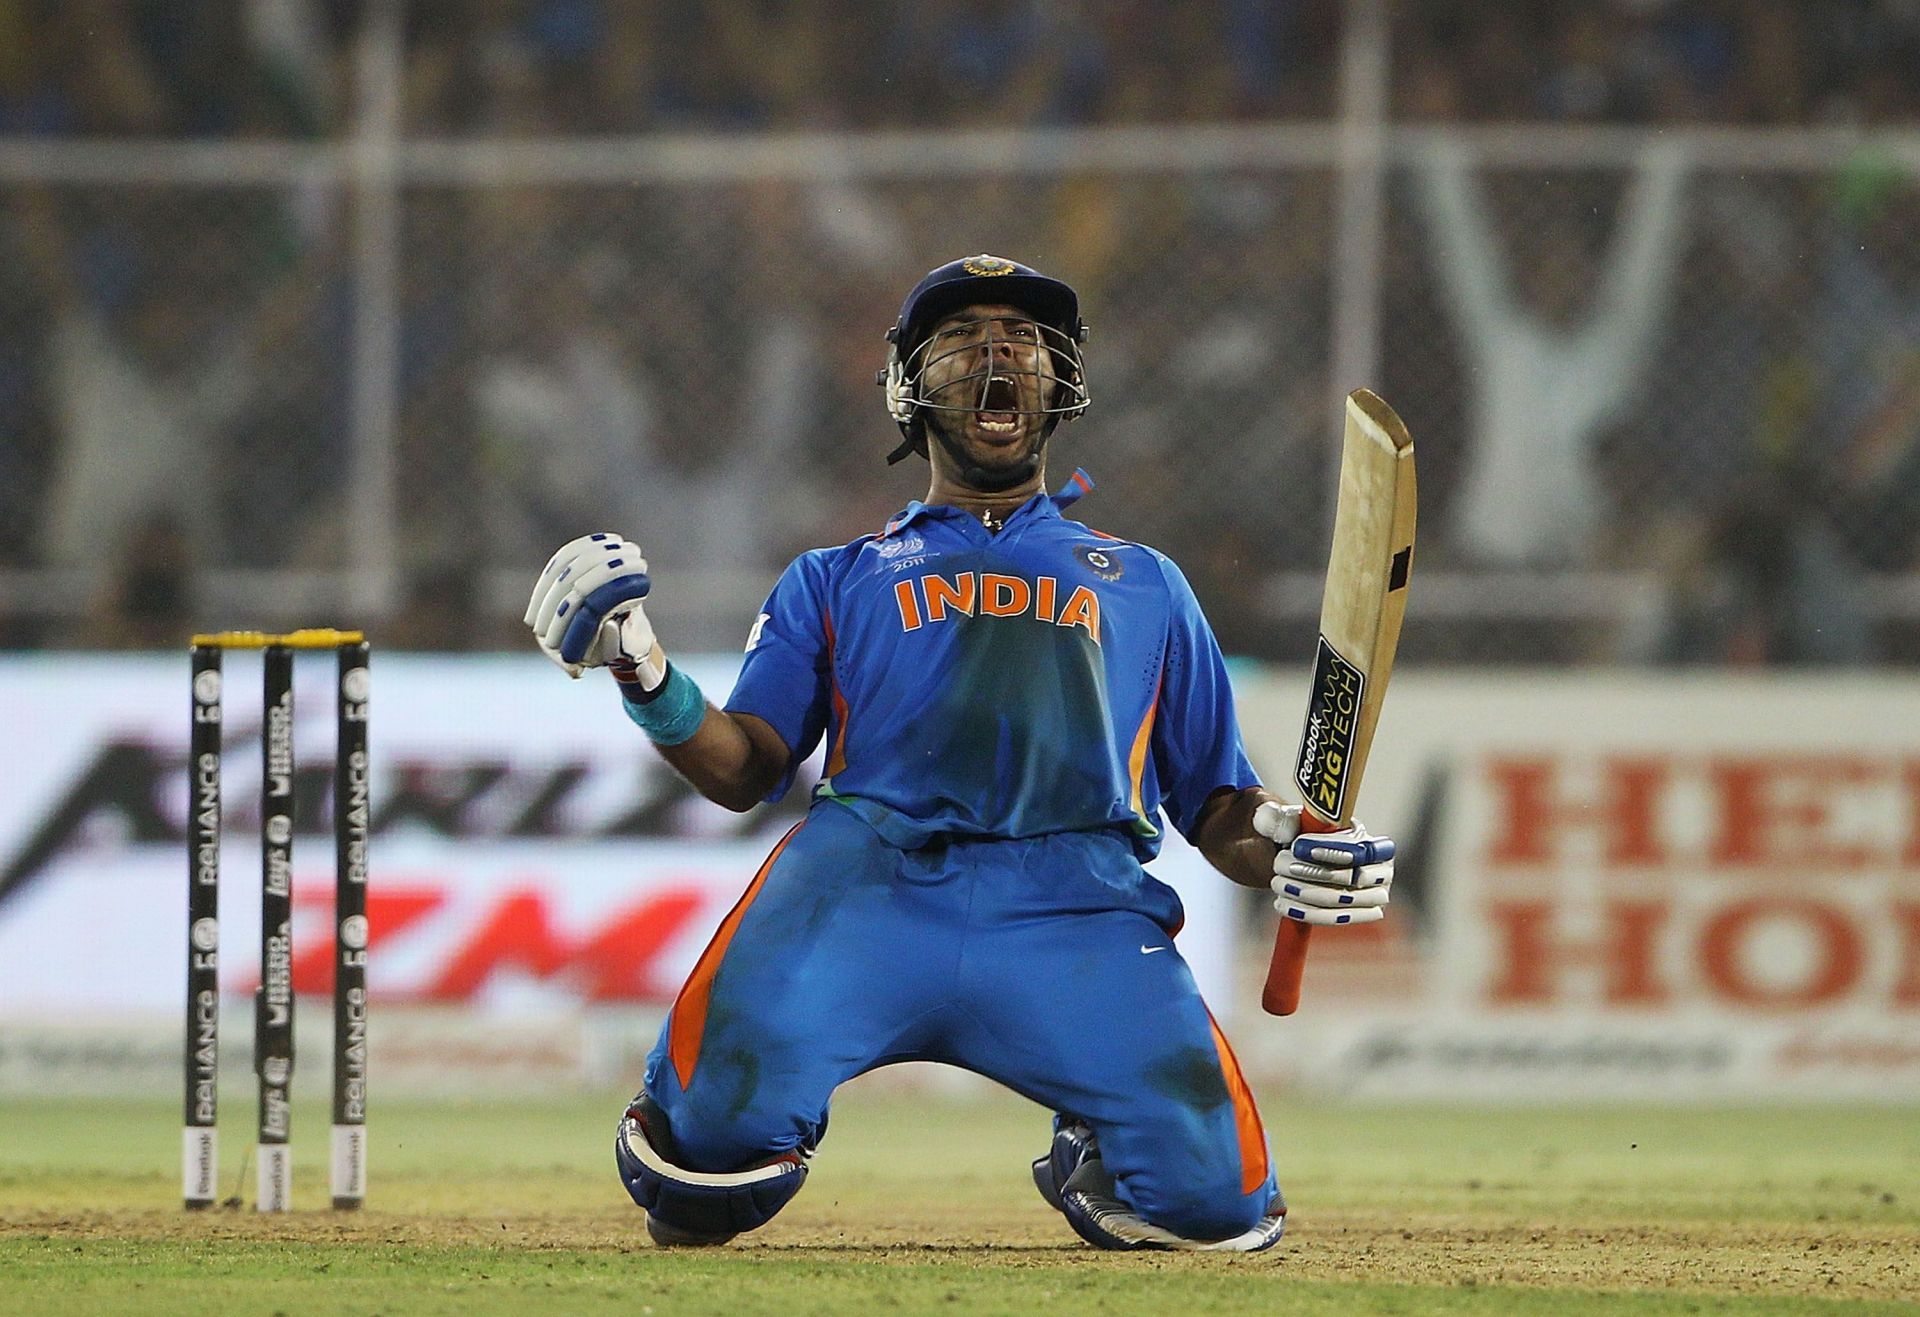 Yuvraj Singh seals 2011 World Cup semi-final place for India. (Image Credits: Getty)